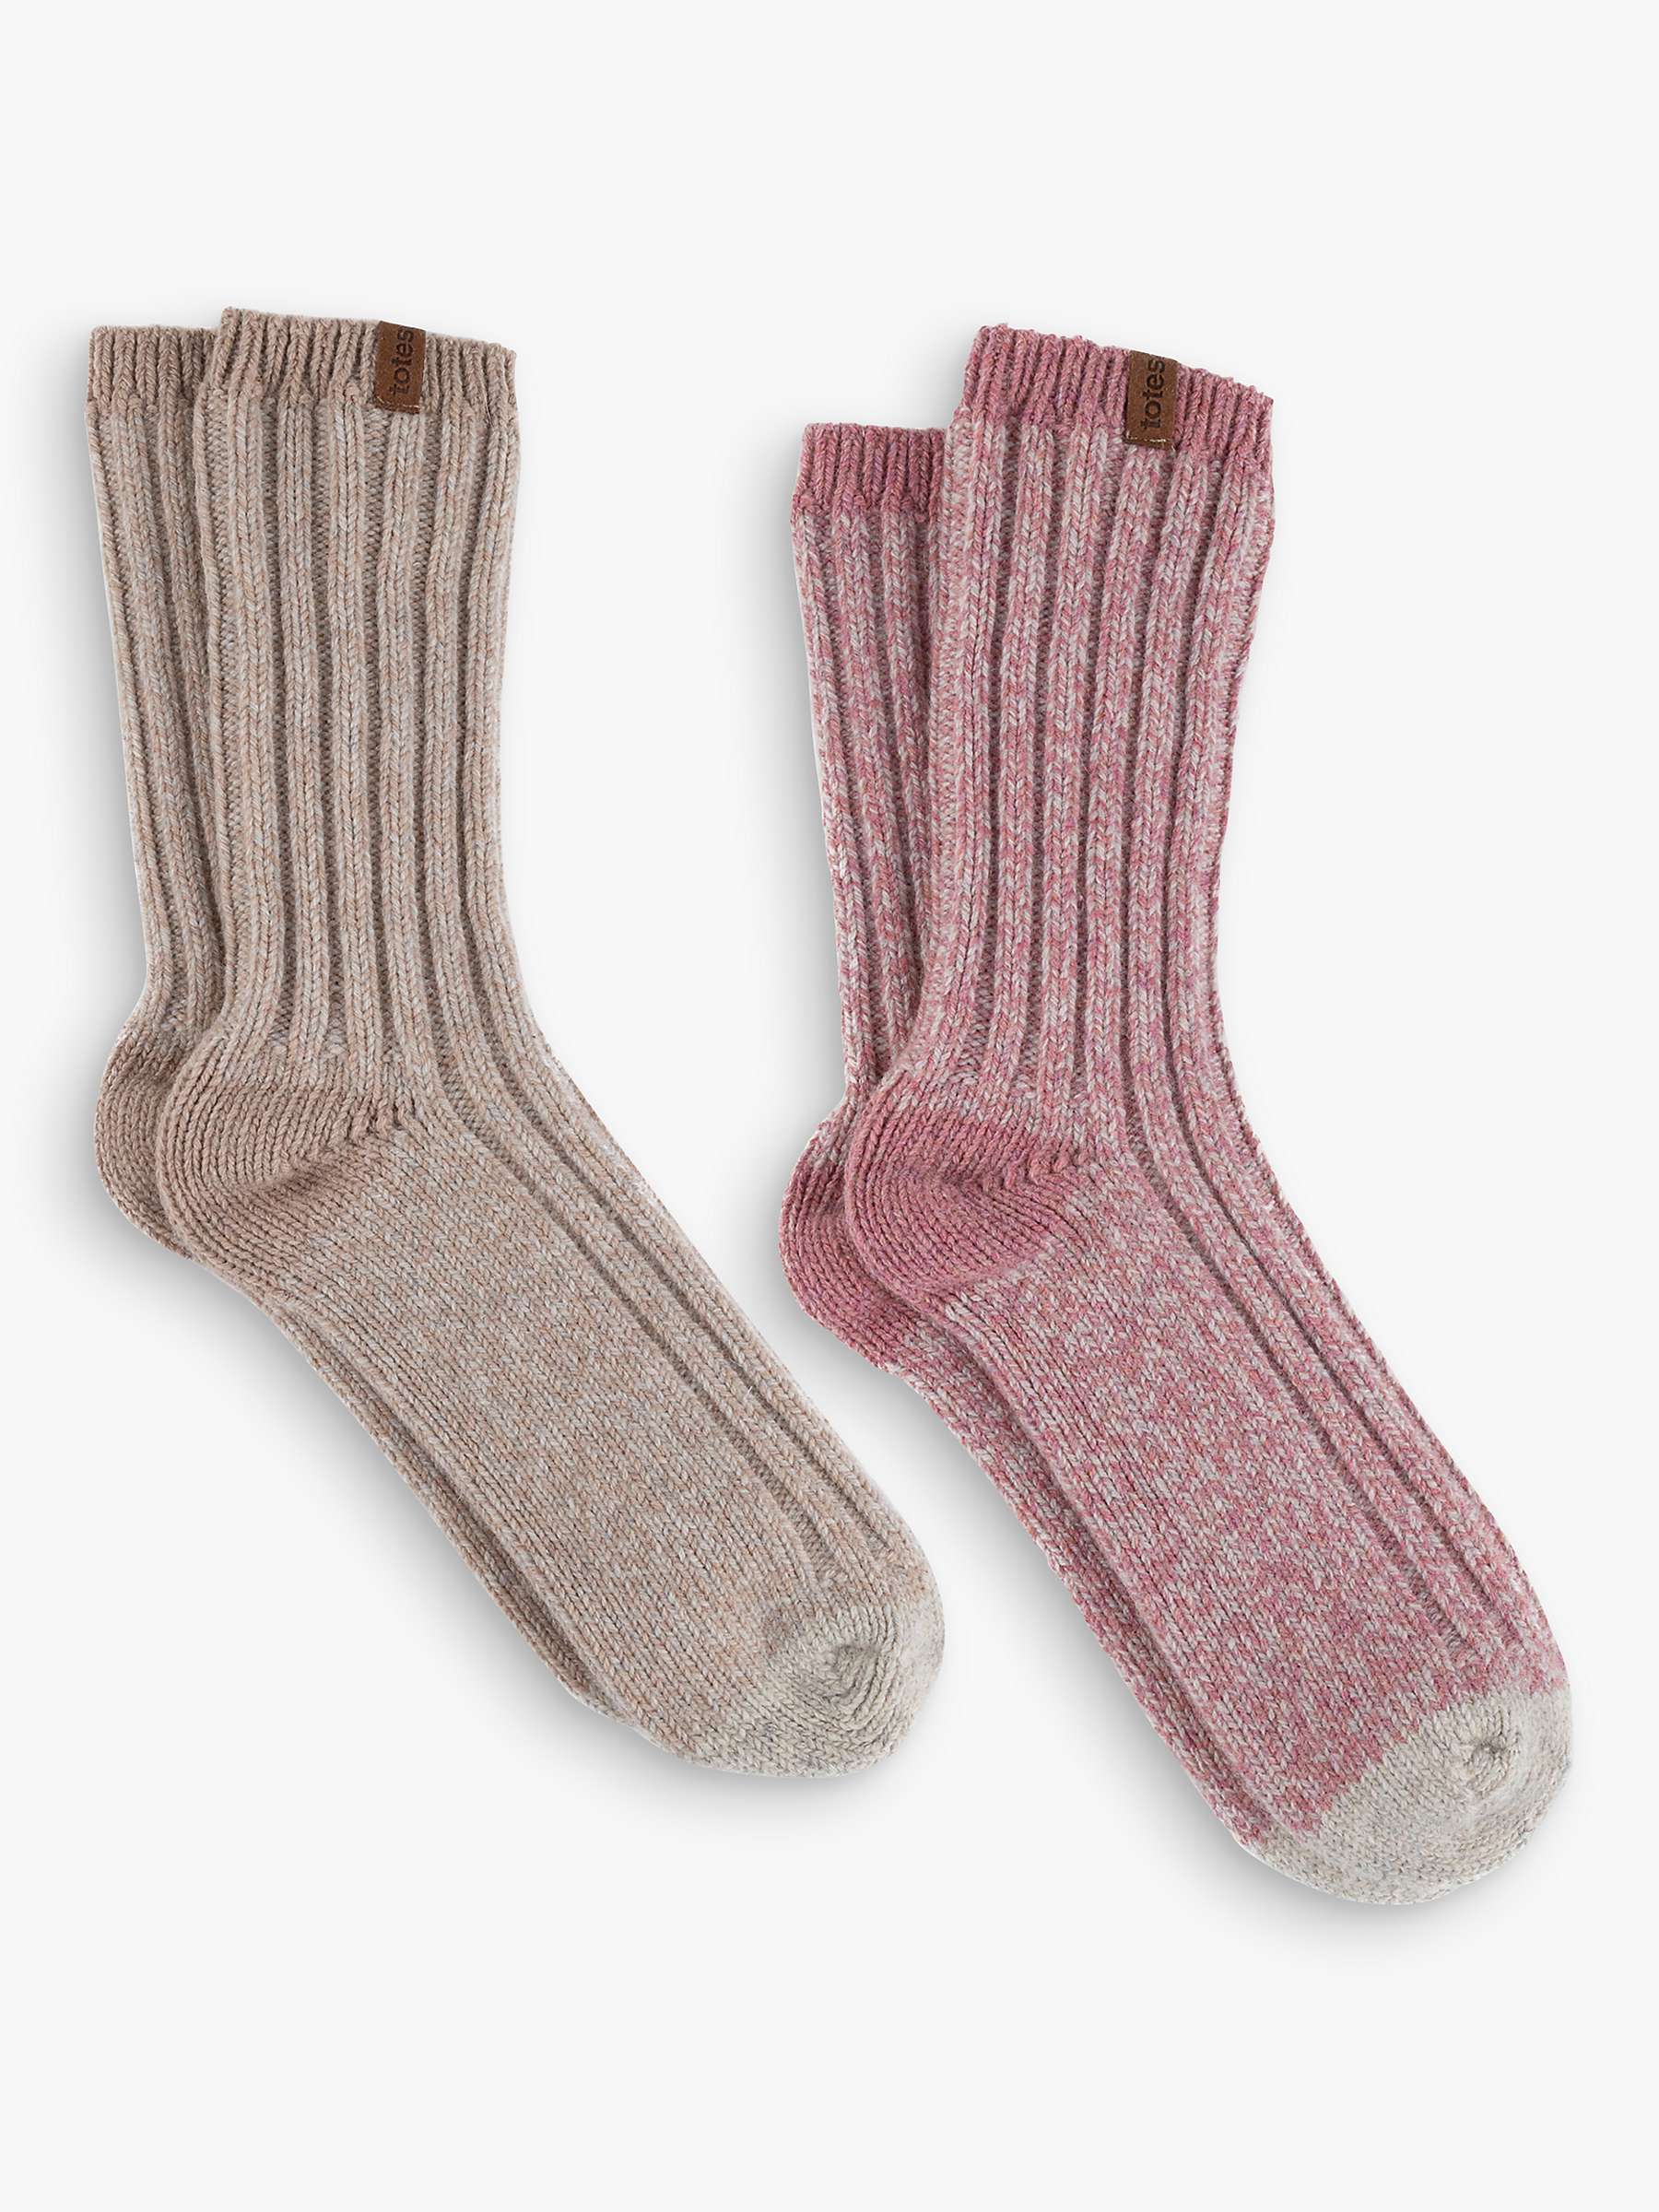 Buy totes Chunky Wool Blend Boot Socks, Pack of 2, Blush/Oat Online at johnlewis.com